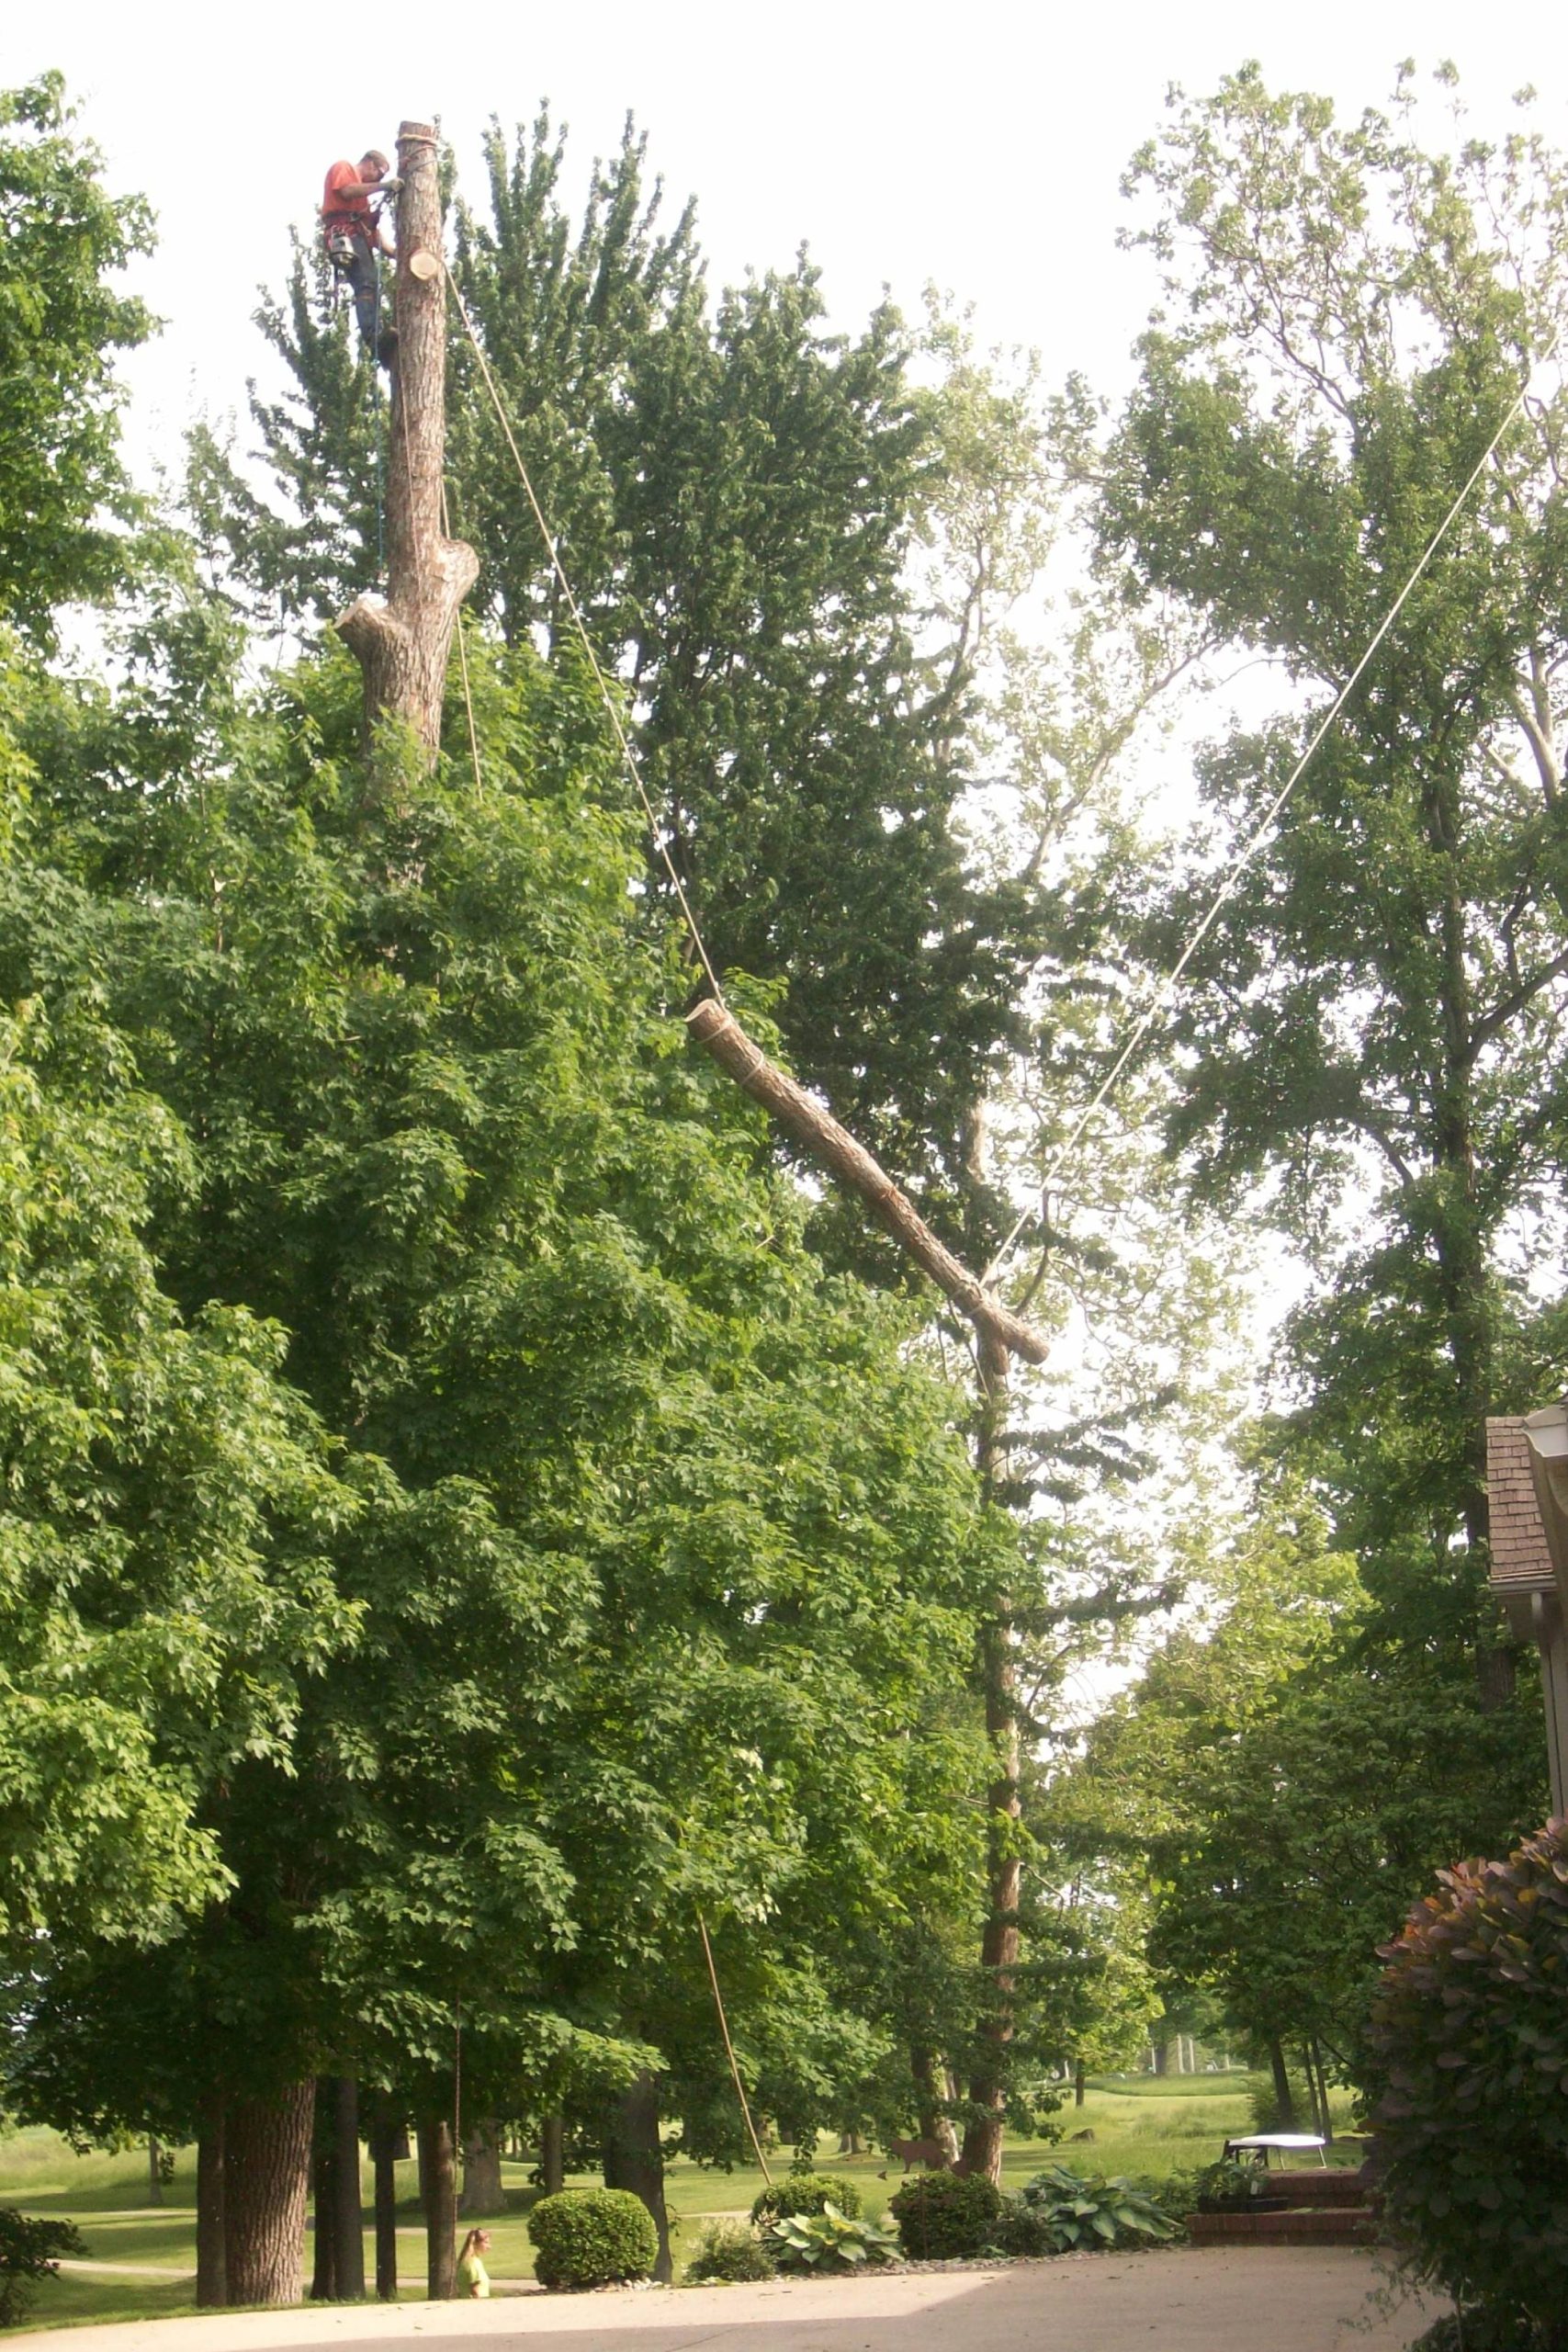 Branches from the top of a large tree being safely removed using cables.